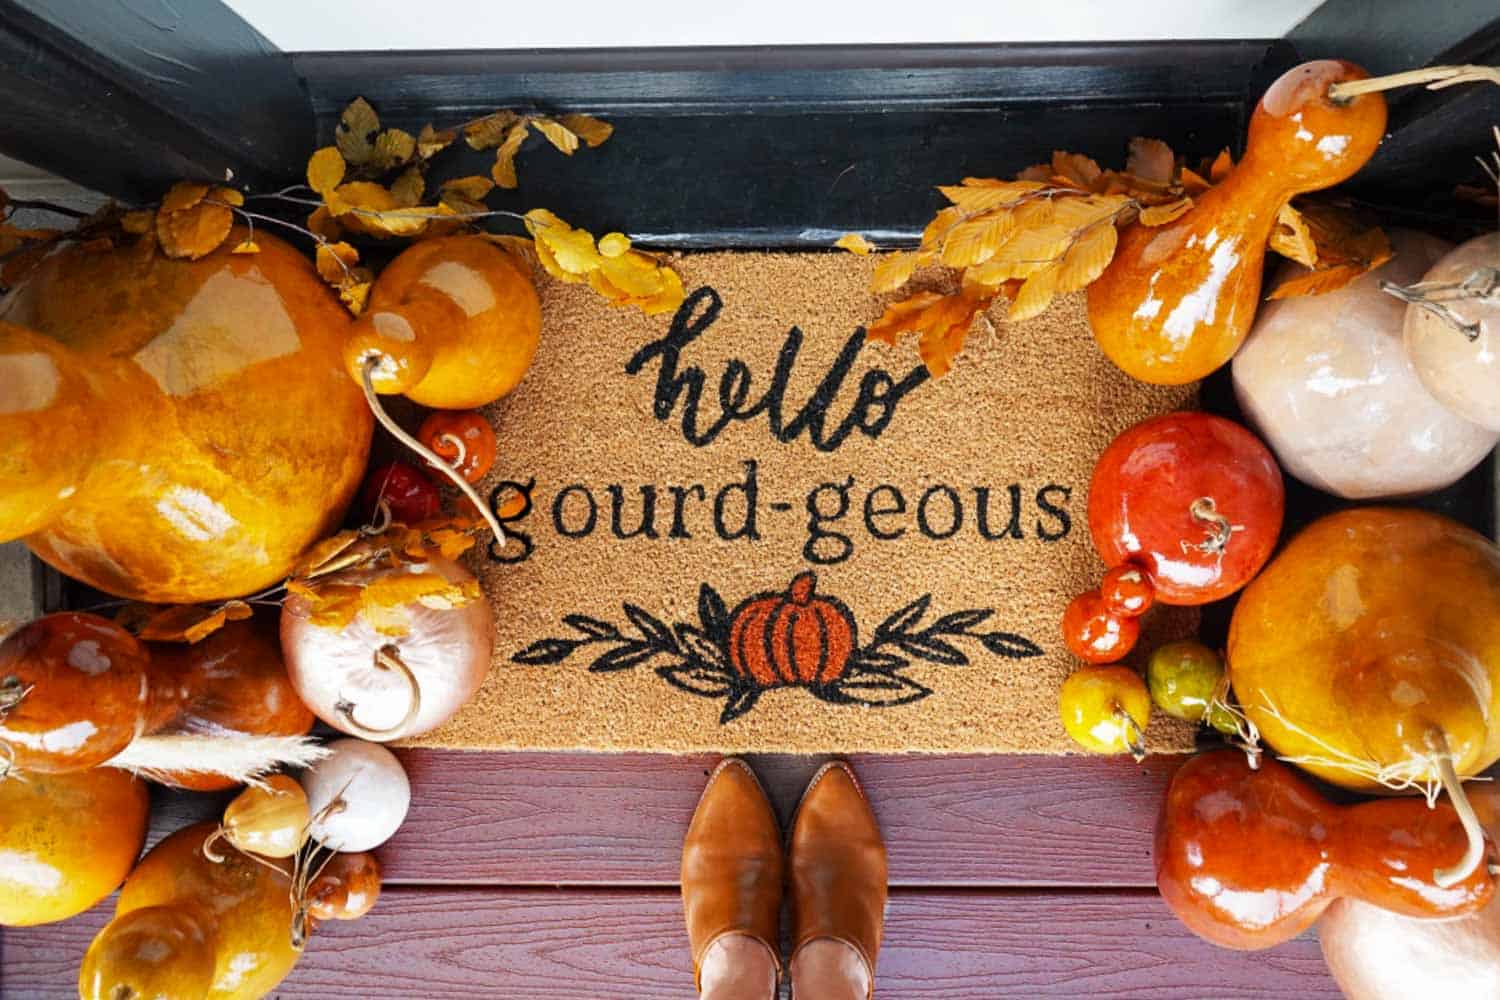 35 Fall Front Porch Decorating Ideas on a Budget